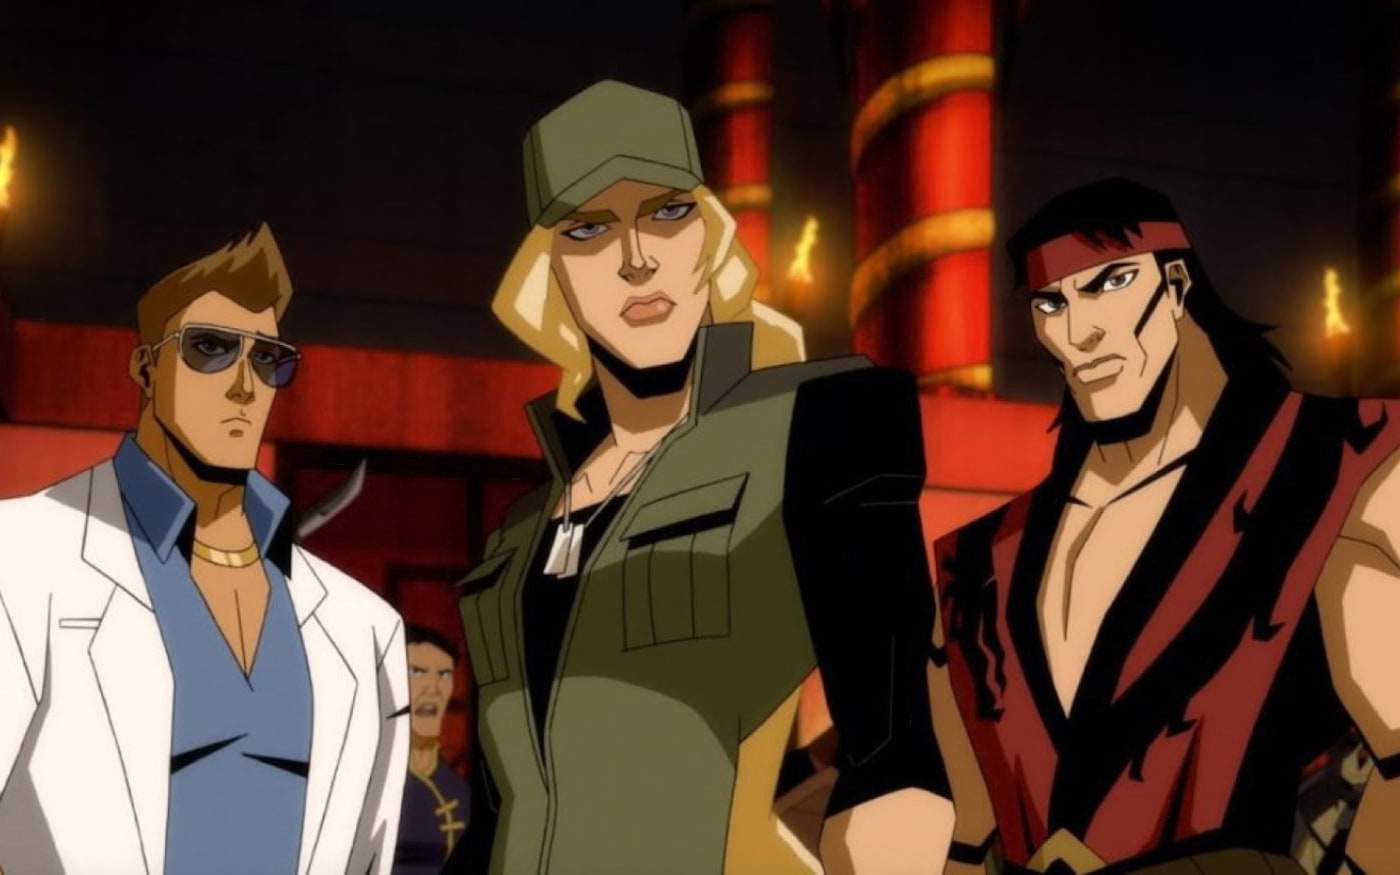 Check out the new uncensored trailer for the Mortal Kombat Legends: Scorpion’s Revenge animation